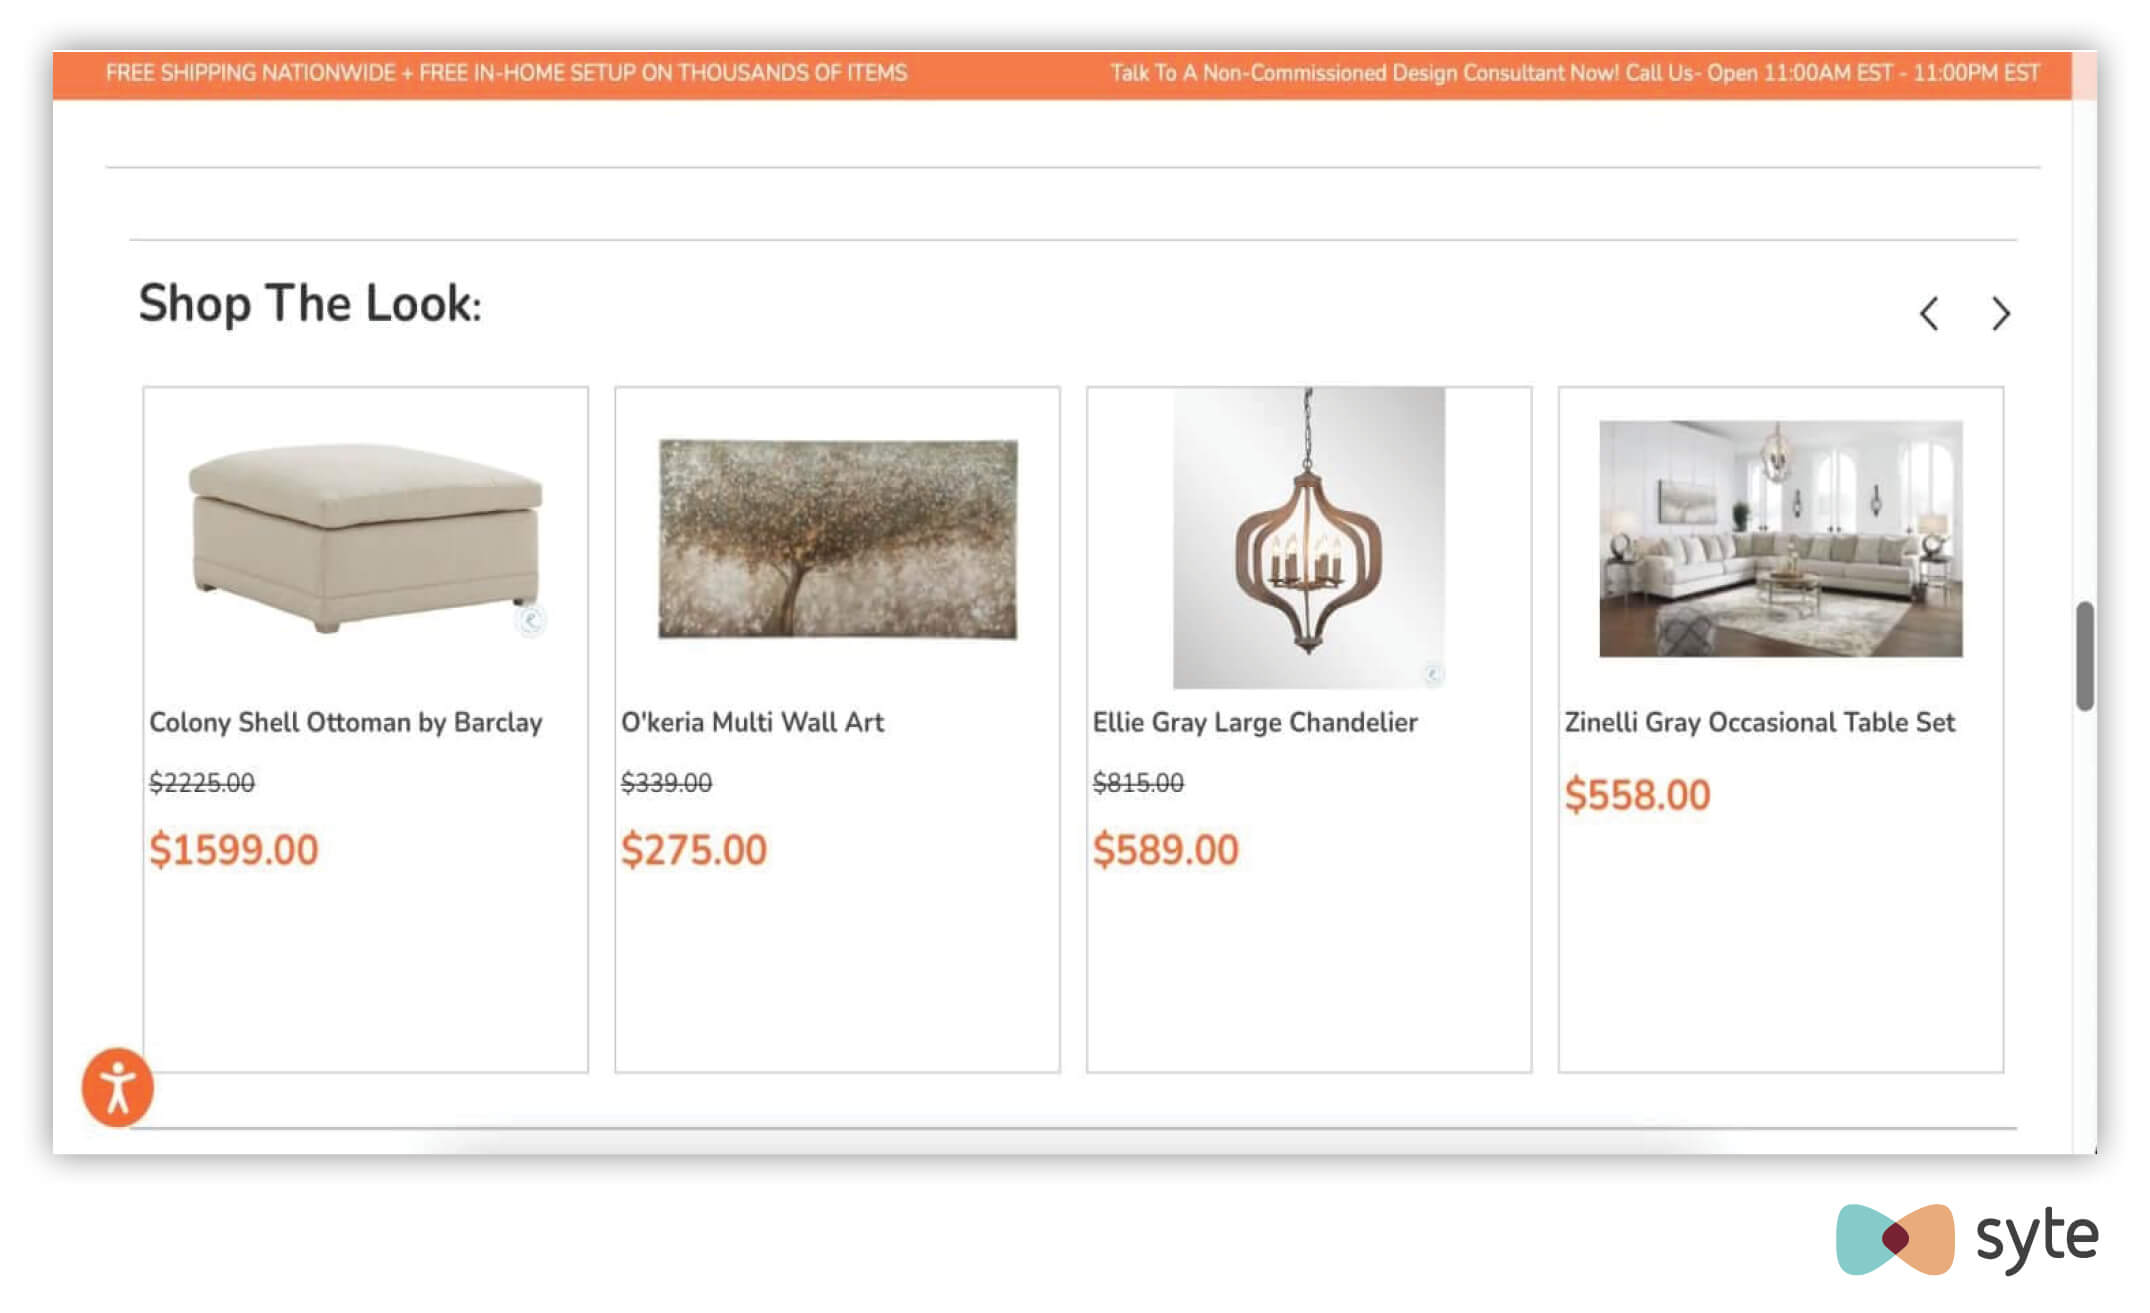 coleman furniture shop the look tool, an ecommerce UX best practice